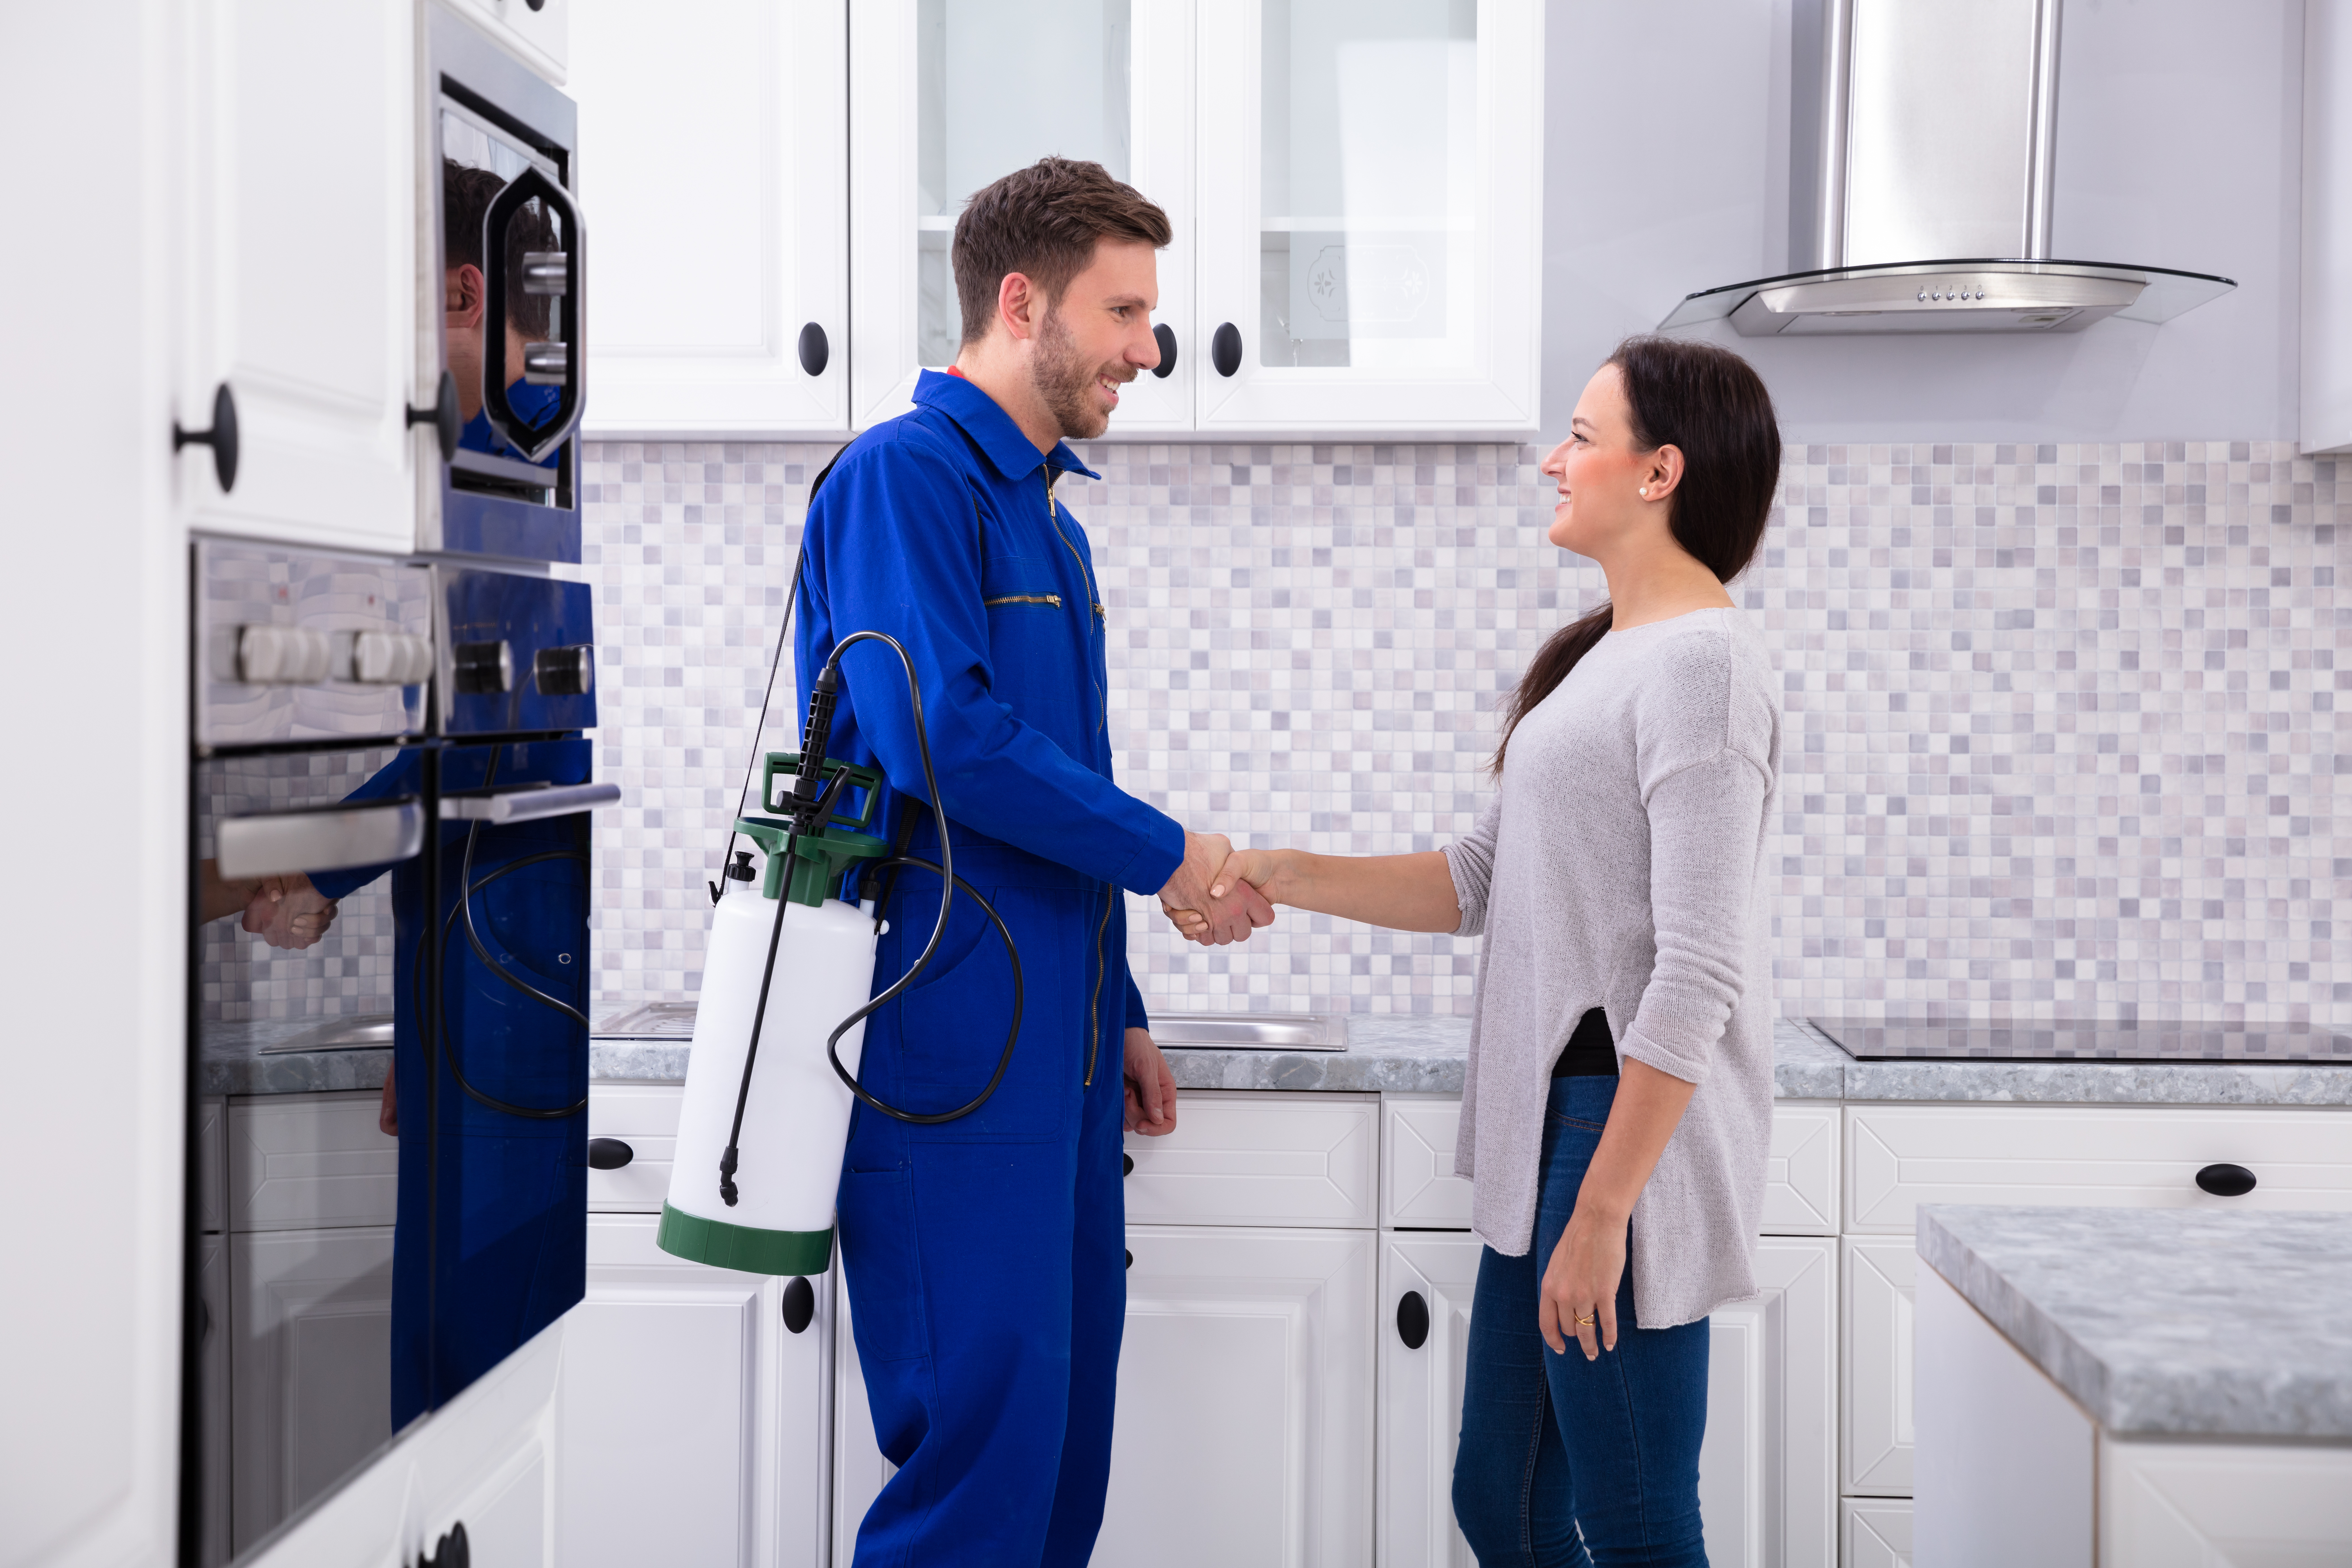 Male Pest Control Worker Shaking Hands With Happy Woman In Kitchen